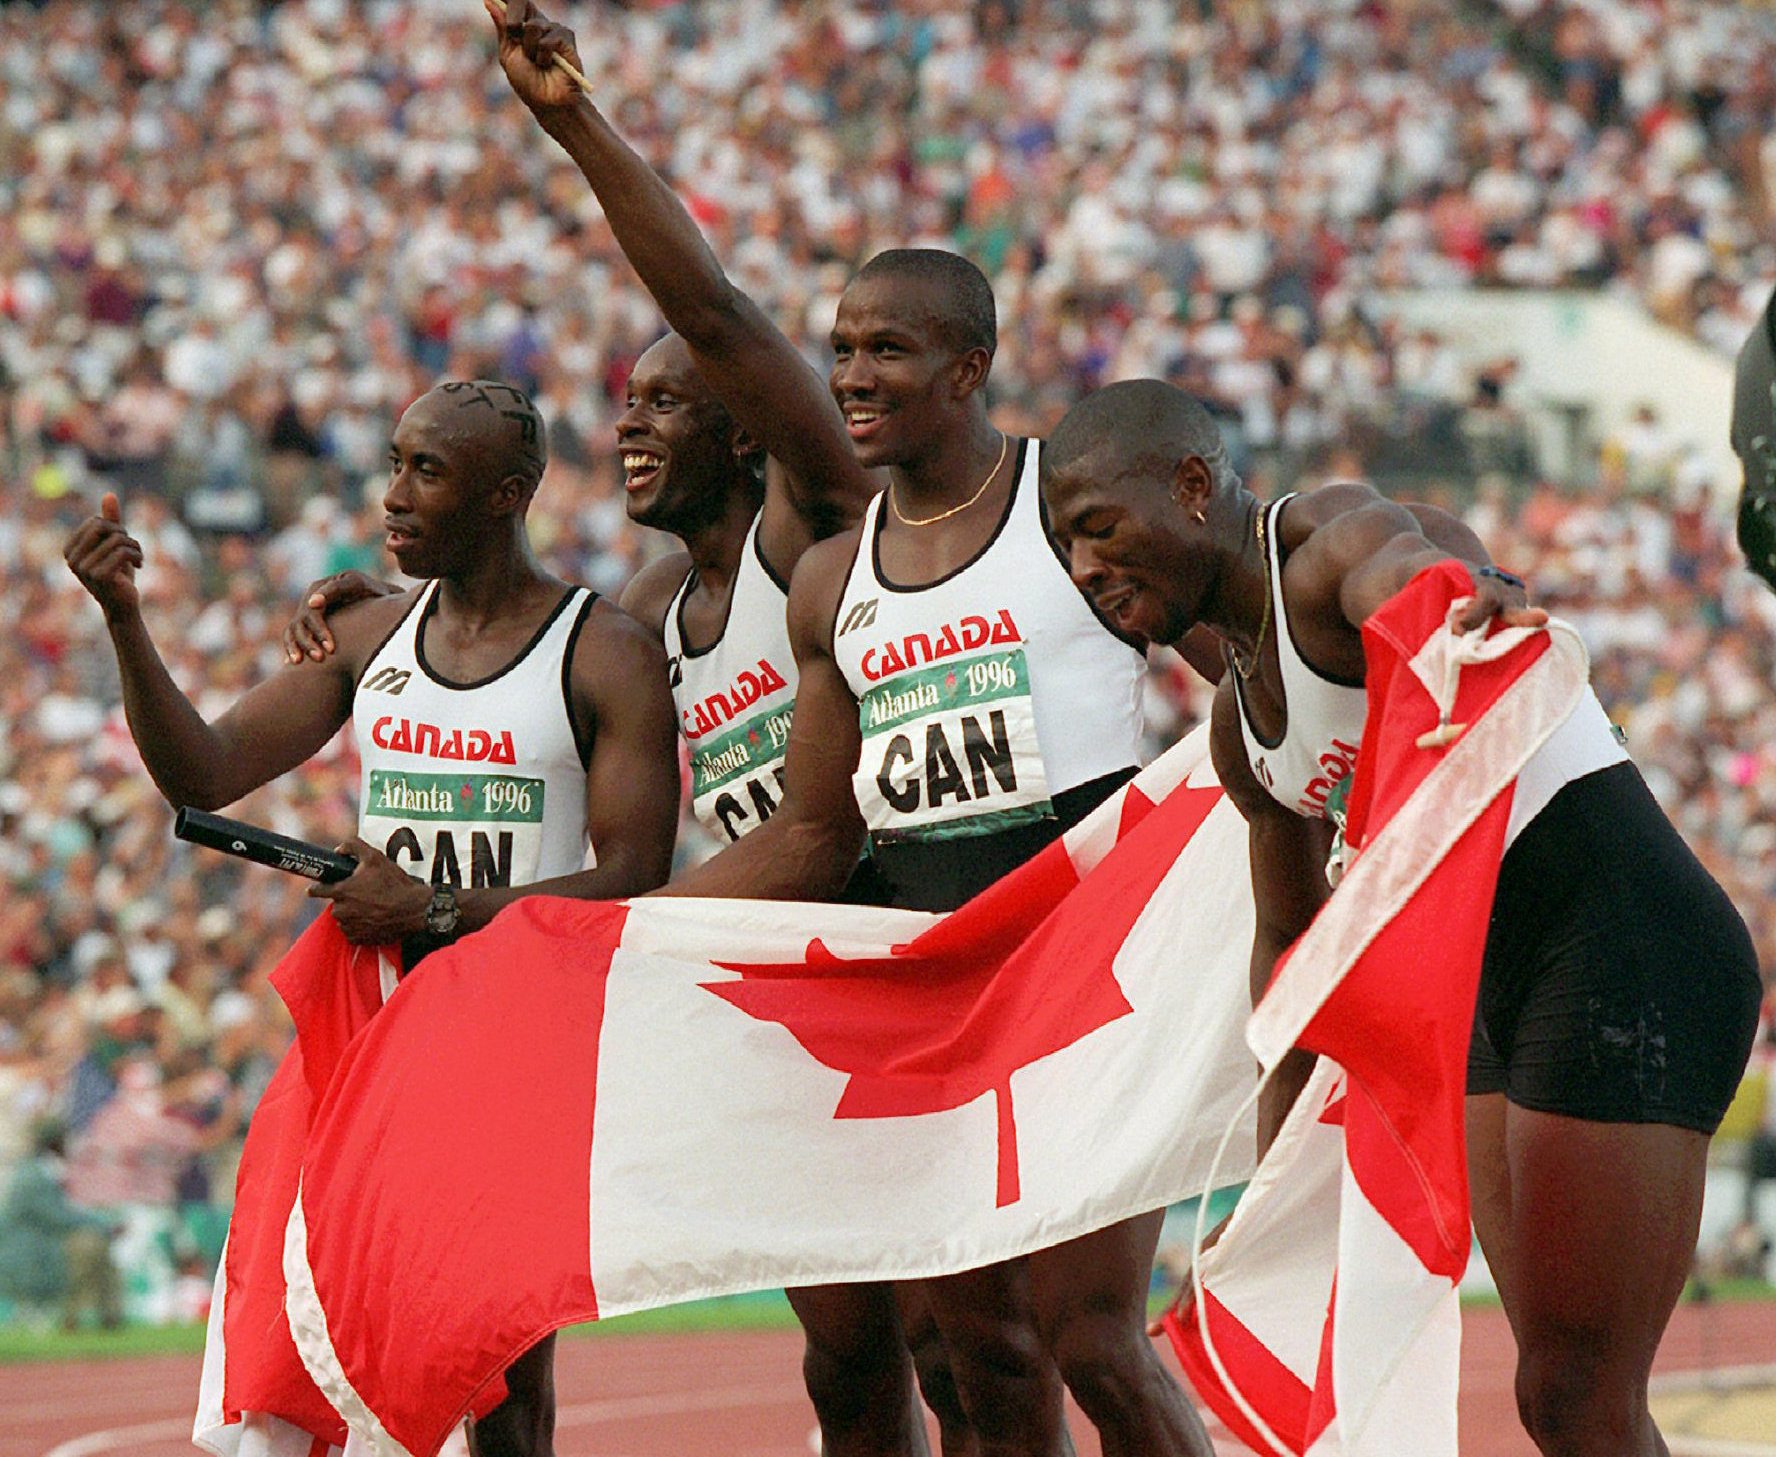 The Canadian men's 4X100 metre relay team celebrate after winning the gold medal at the Summer Olympic Games in Atlanta, Saturday, August 3, 1996. Seen from left to right are Robert Esmie, Bruny Surin, Donovan Bailey and Glenroy Gilbert. (AP Photo/DenisPaquin)